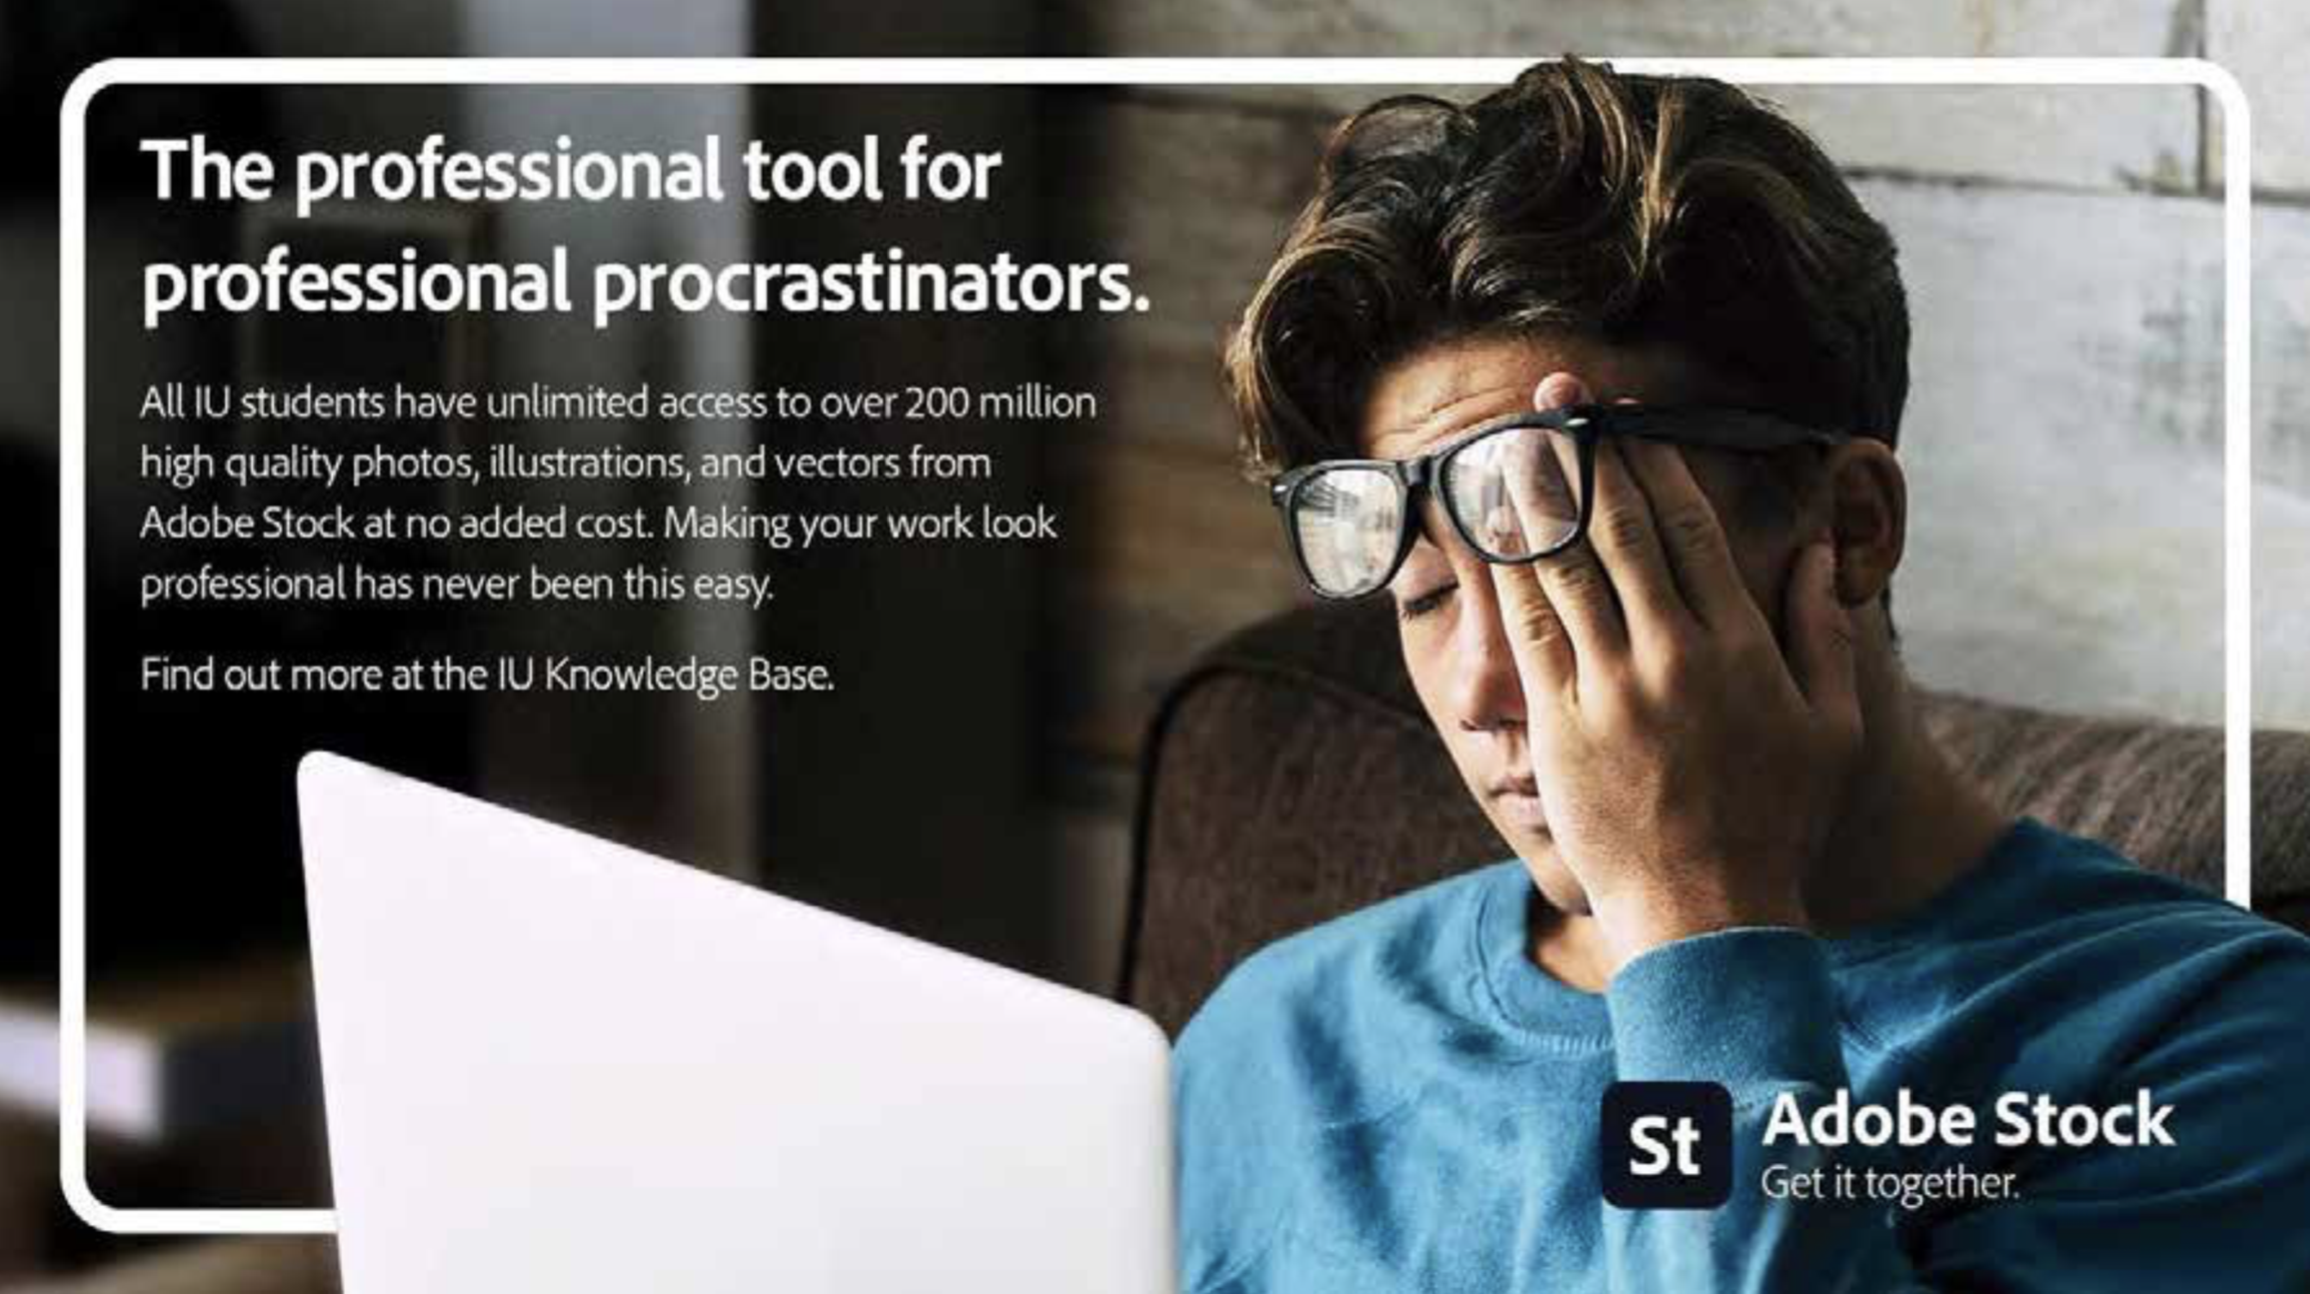 A man rubs his eyes while looking at a laptop. Text: The professional tool for professional procrastinators. All IU students have unlimited access to over 200 million high quality photos, illustrations, and vectors from Adobe Stock at no added cost. Making your work look professional has never been this easy. Find out more at the IU Knowledge Base. Adobe Stock. Get it together.